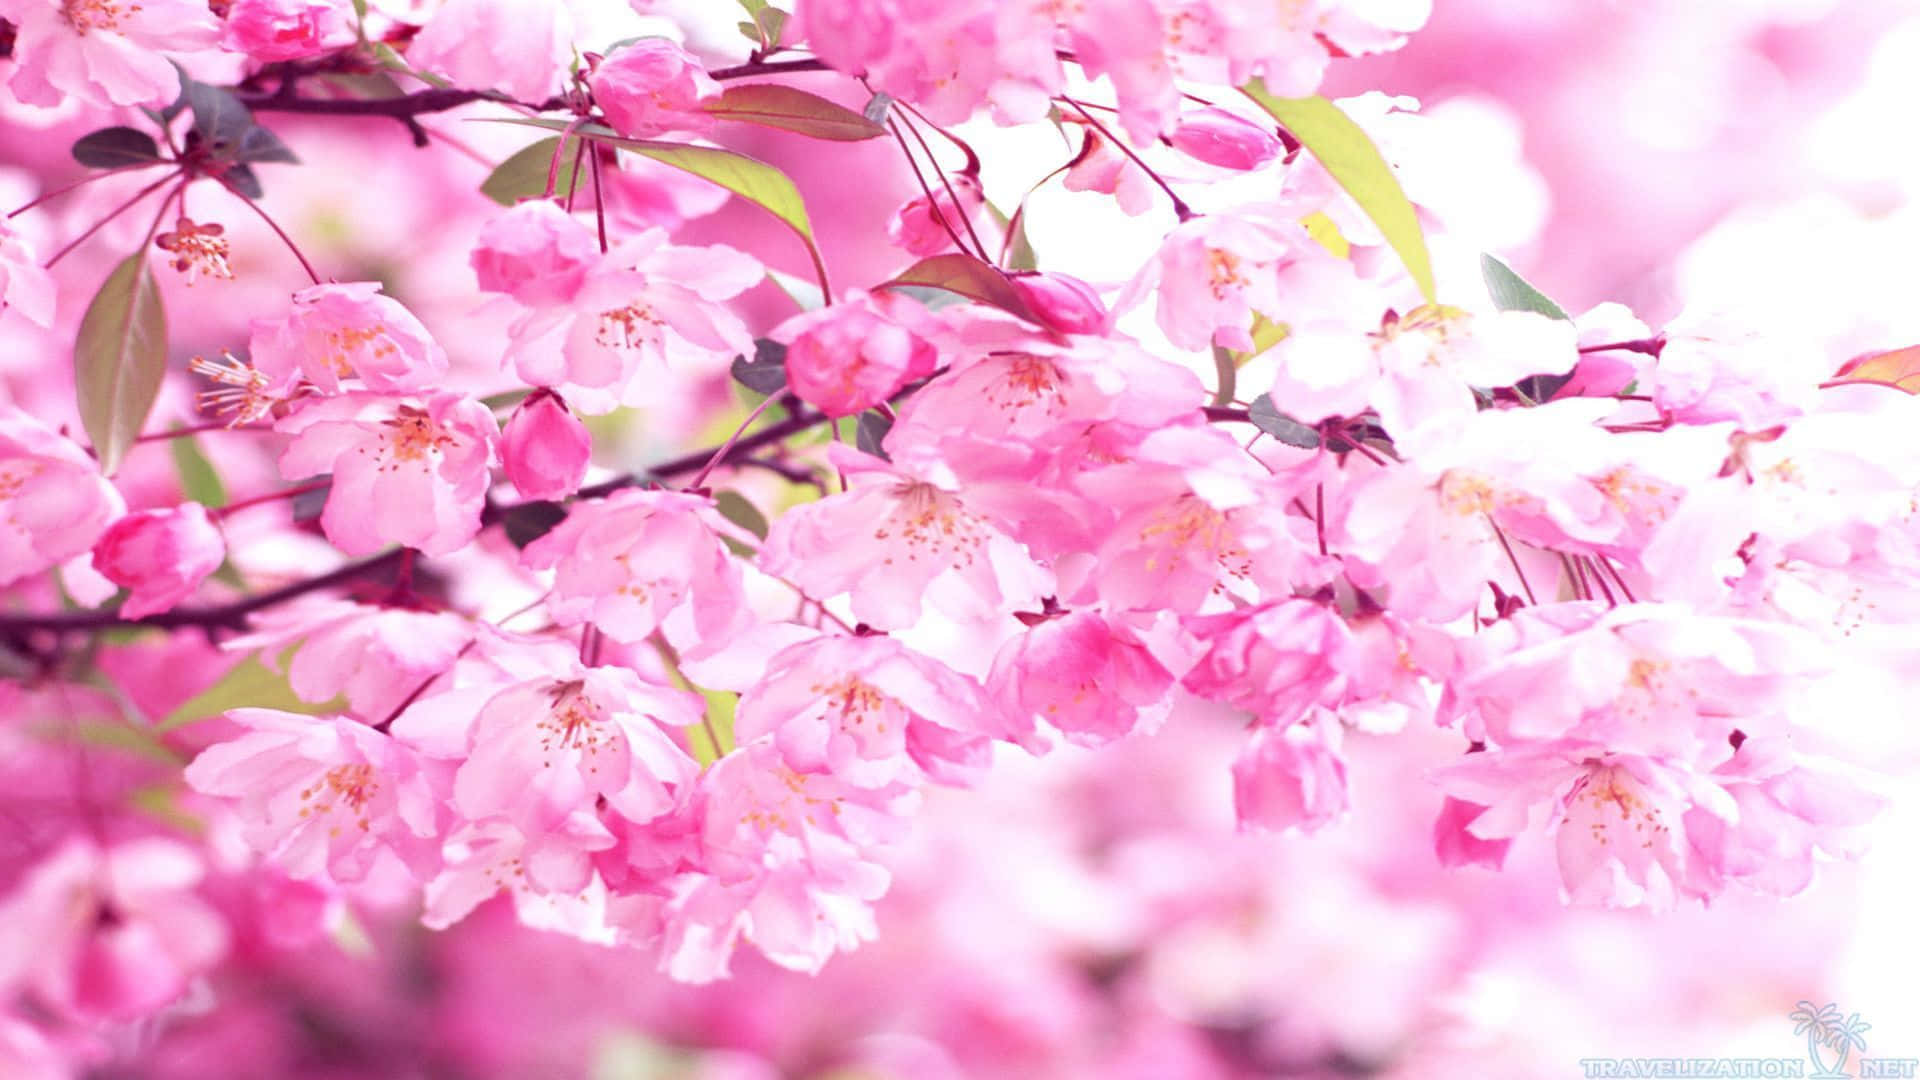 Pink Flowers On A Tree Branch Wallpaper